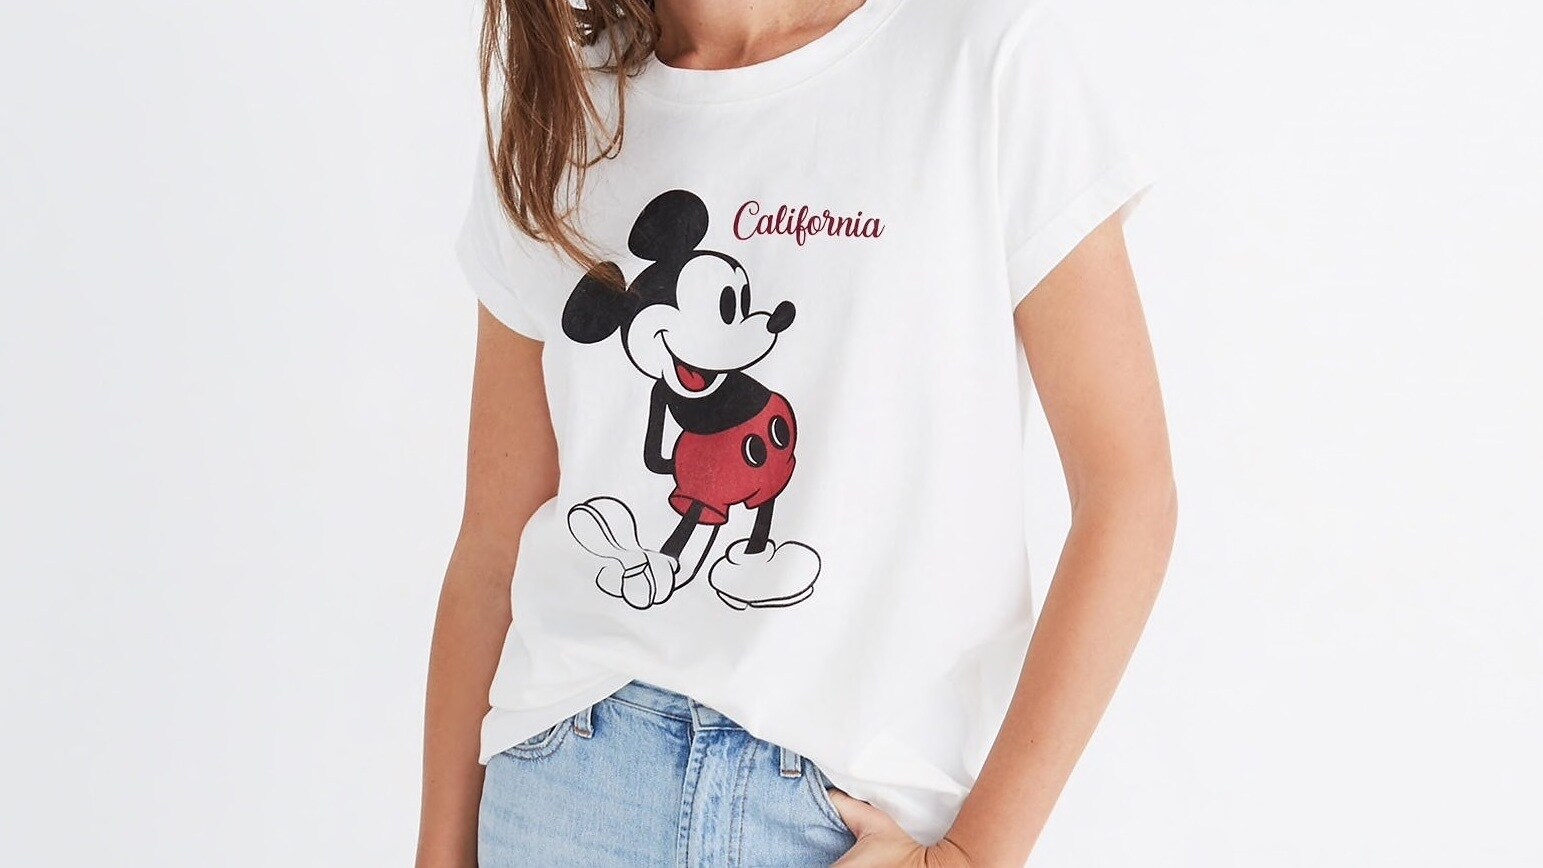 Madewell Just Made Our Day With These Mickey Mouse Pieces in Their Spring Collection